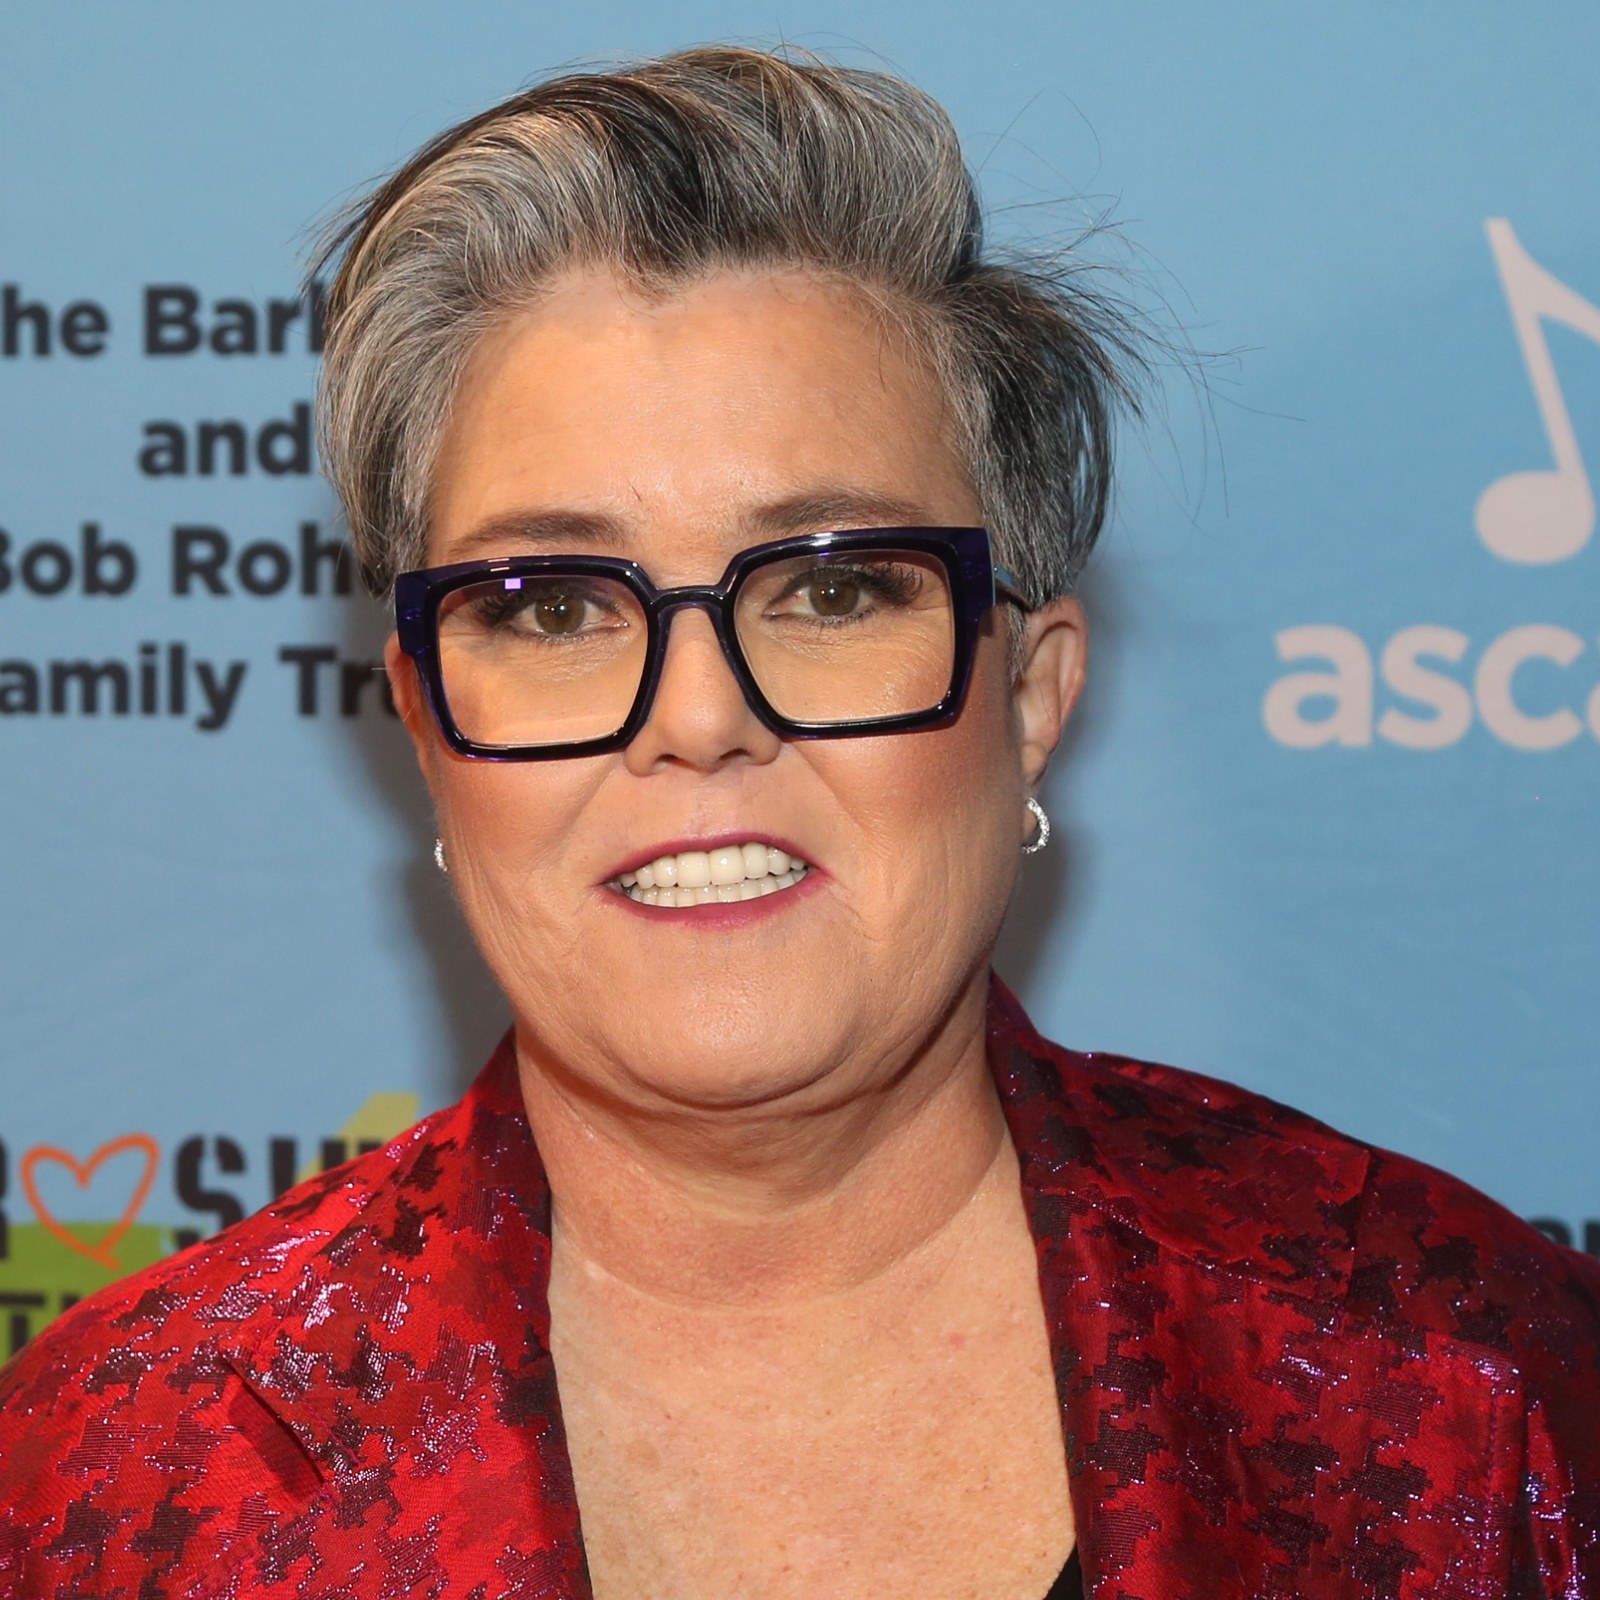 Rosie O'Donnell Reveals Weight Loss After Going on Diabetes Drugs